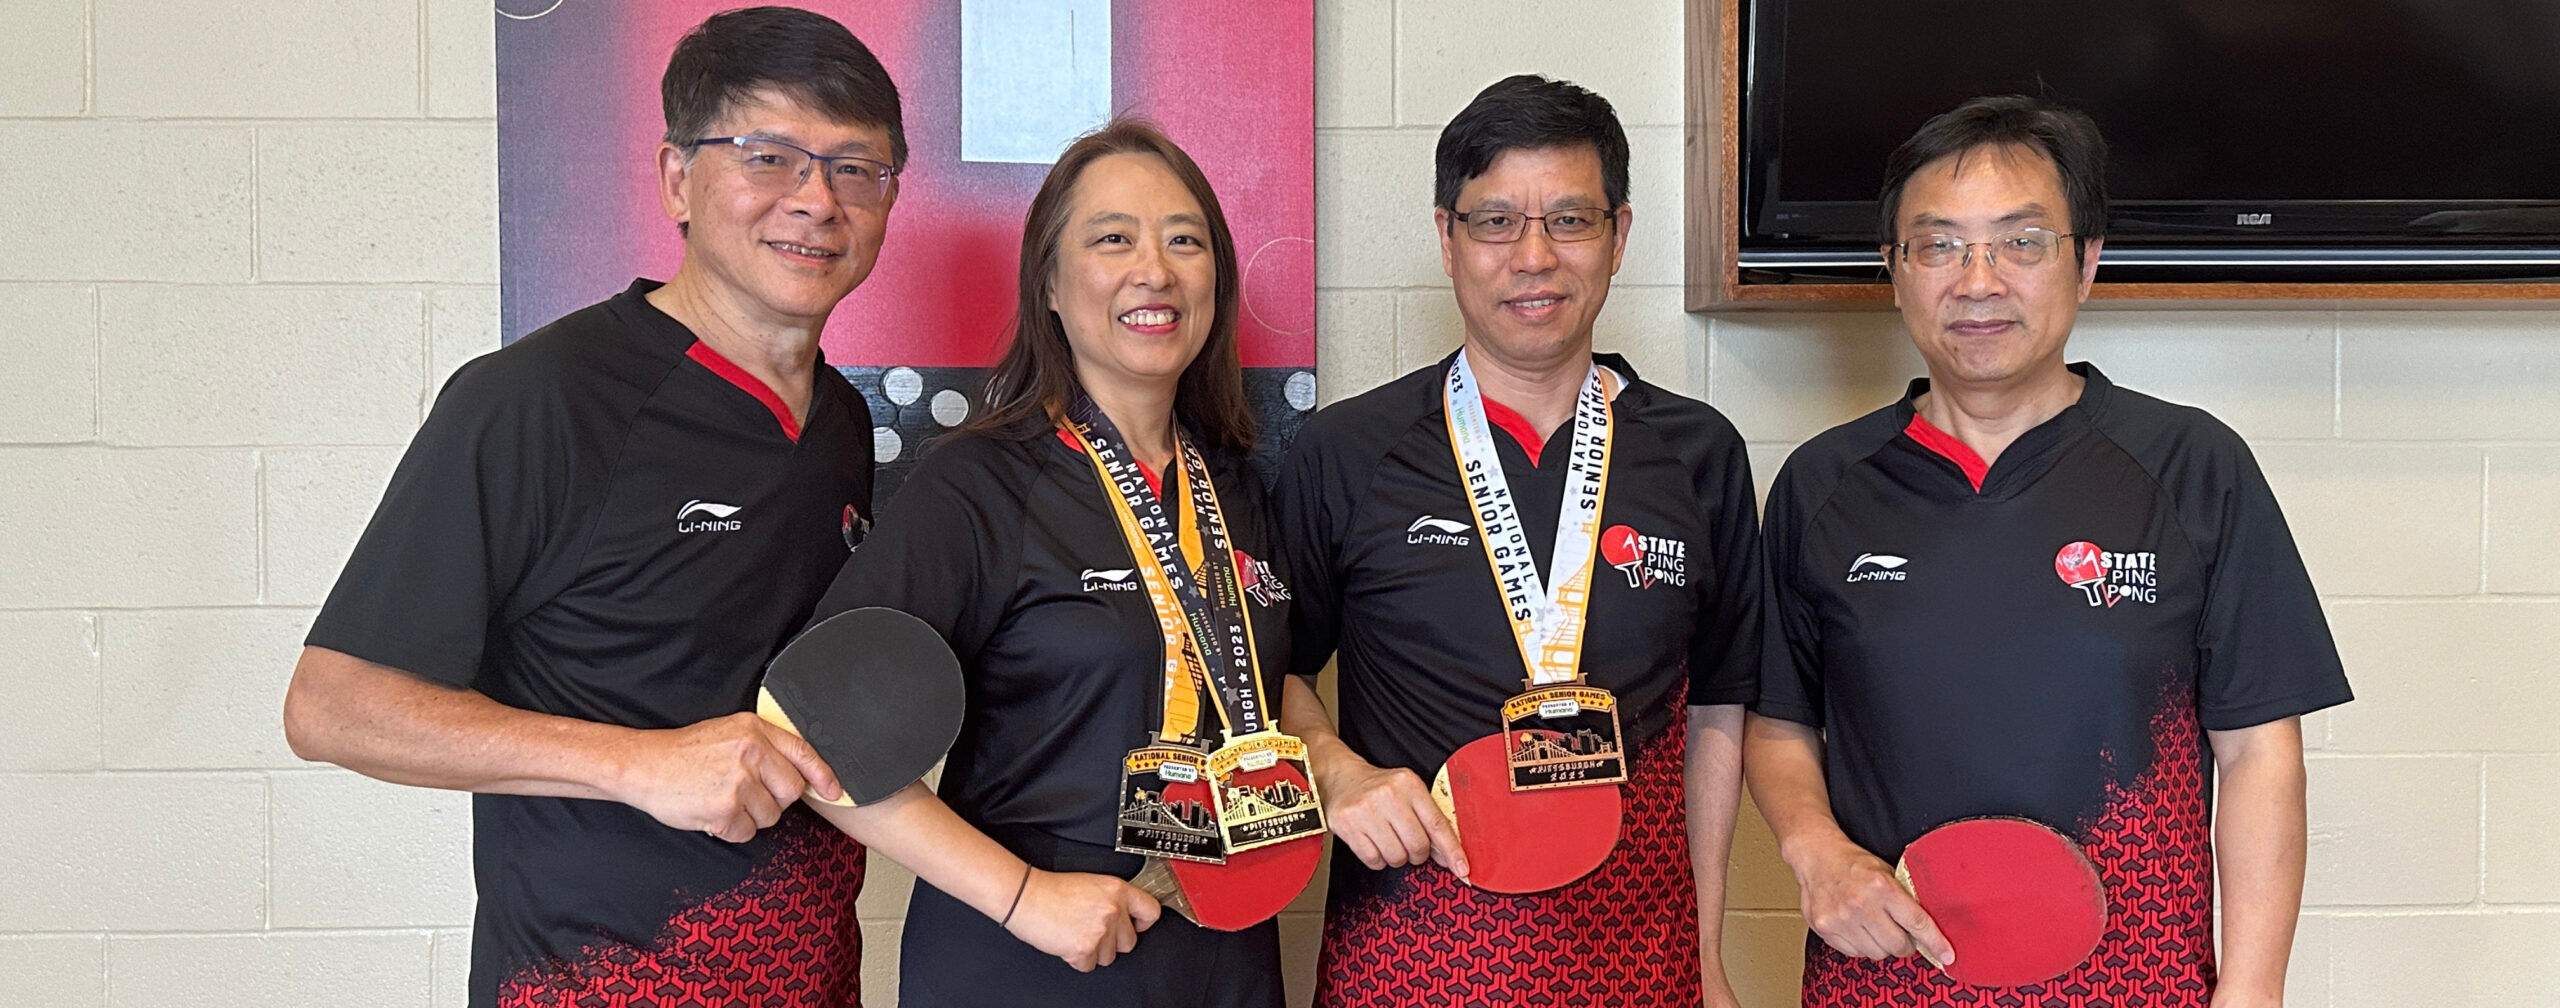 paddlers-place-in-national-senior-games